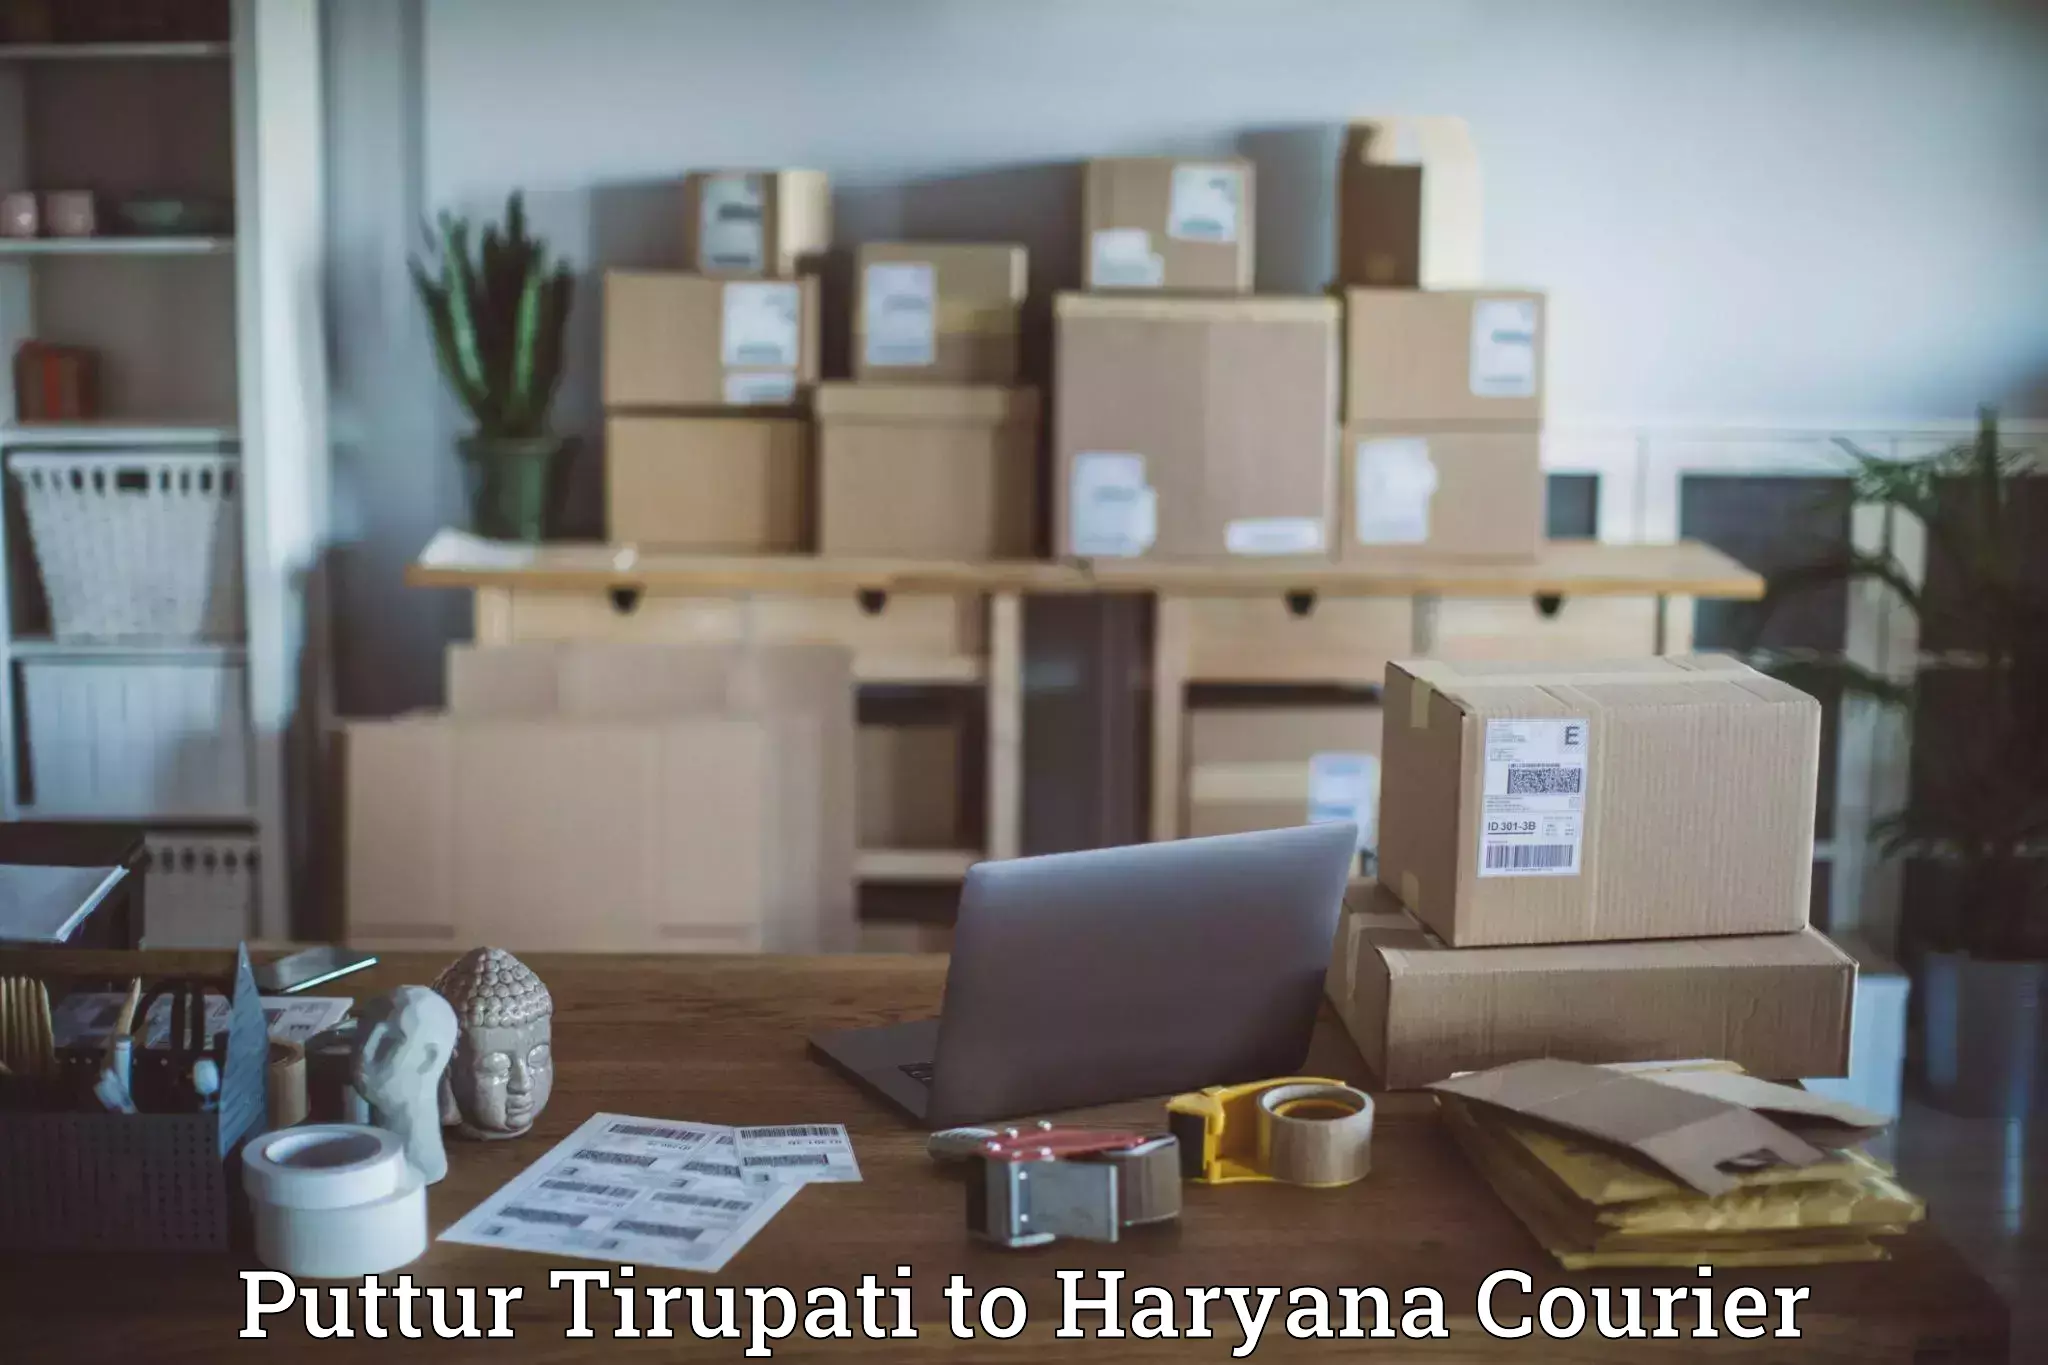 Pharmaceutical courier Puttur Tirupati to Palwal